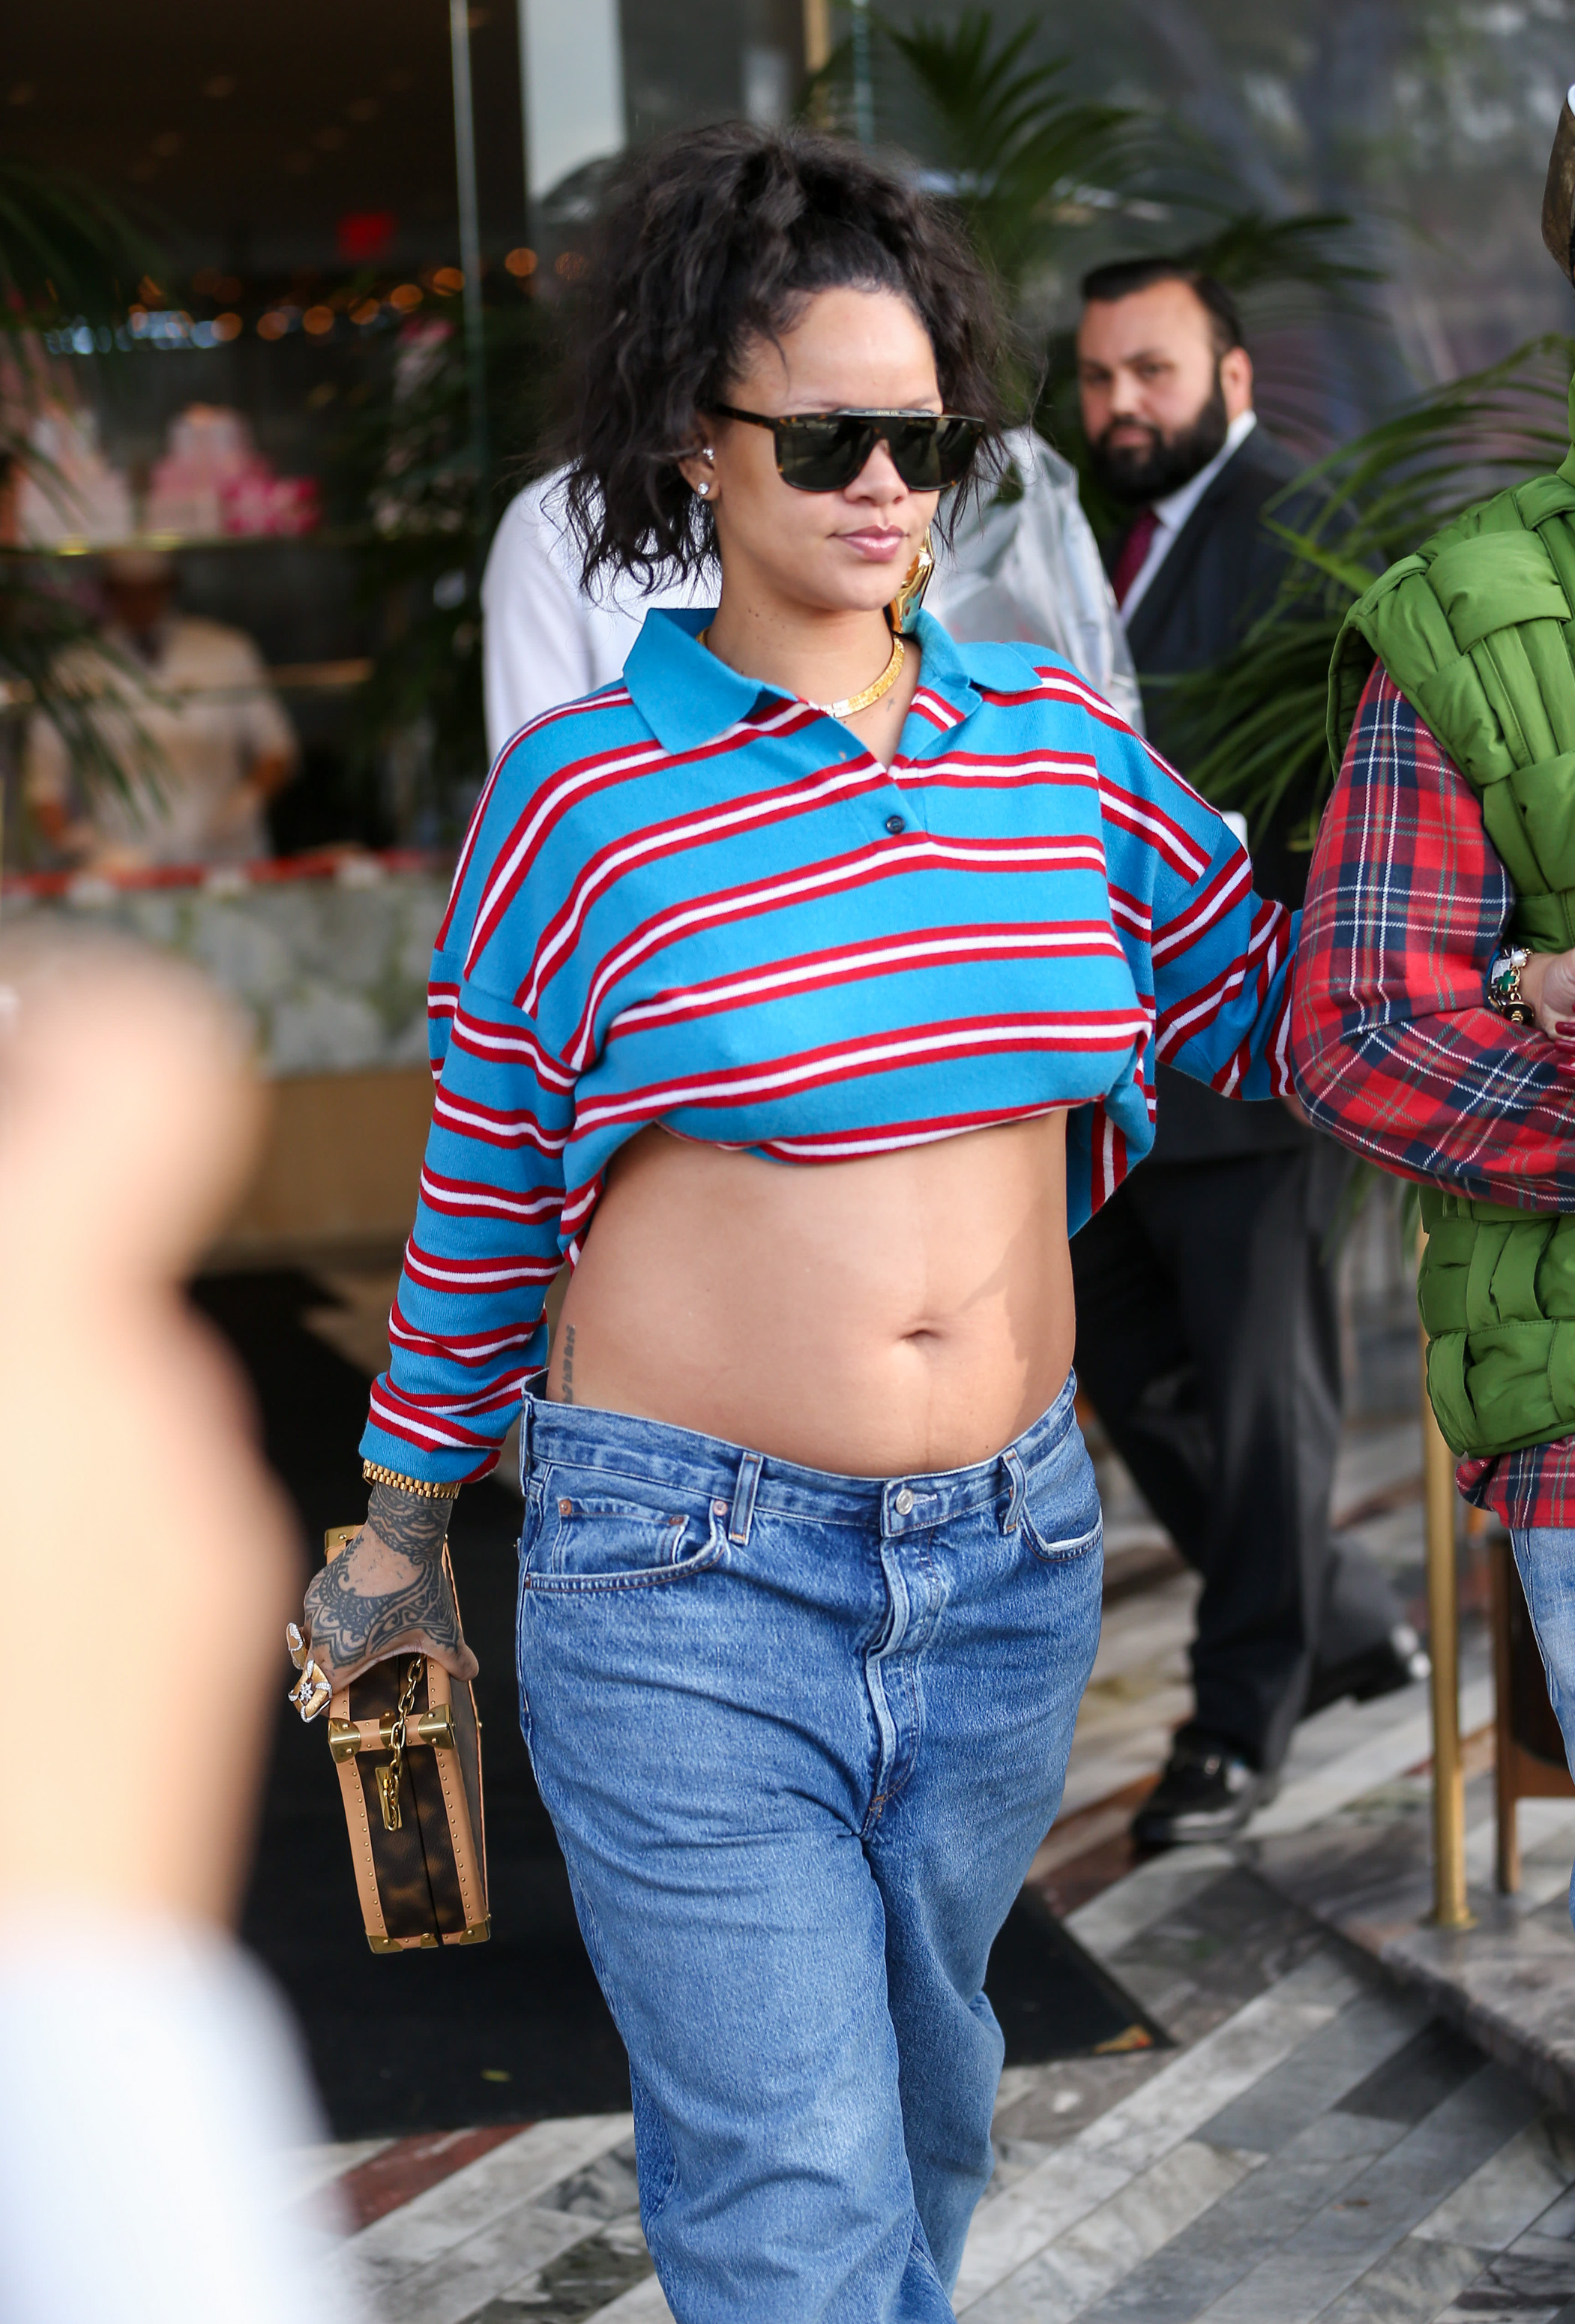 Rihanna Shares Pregnancy Cravings & Glimpse Of Baby Bump